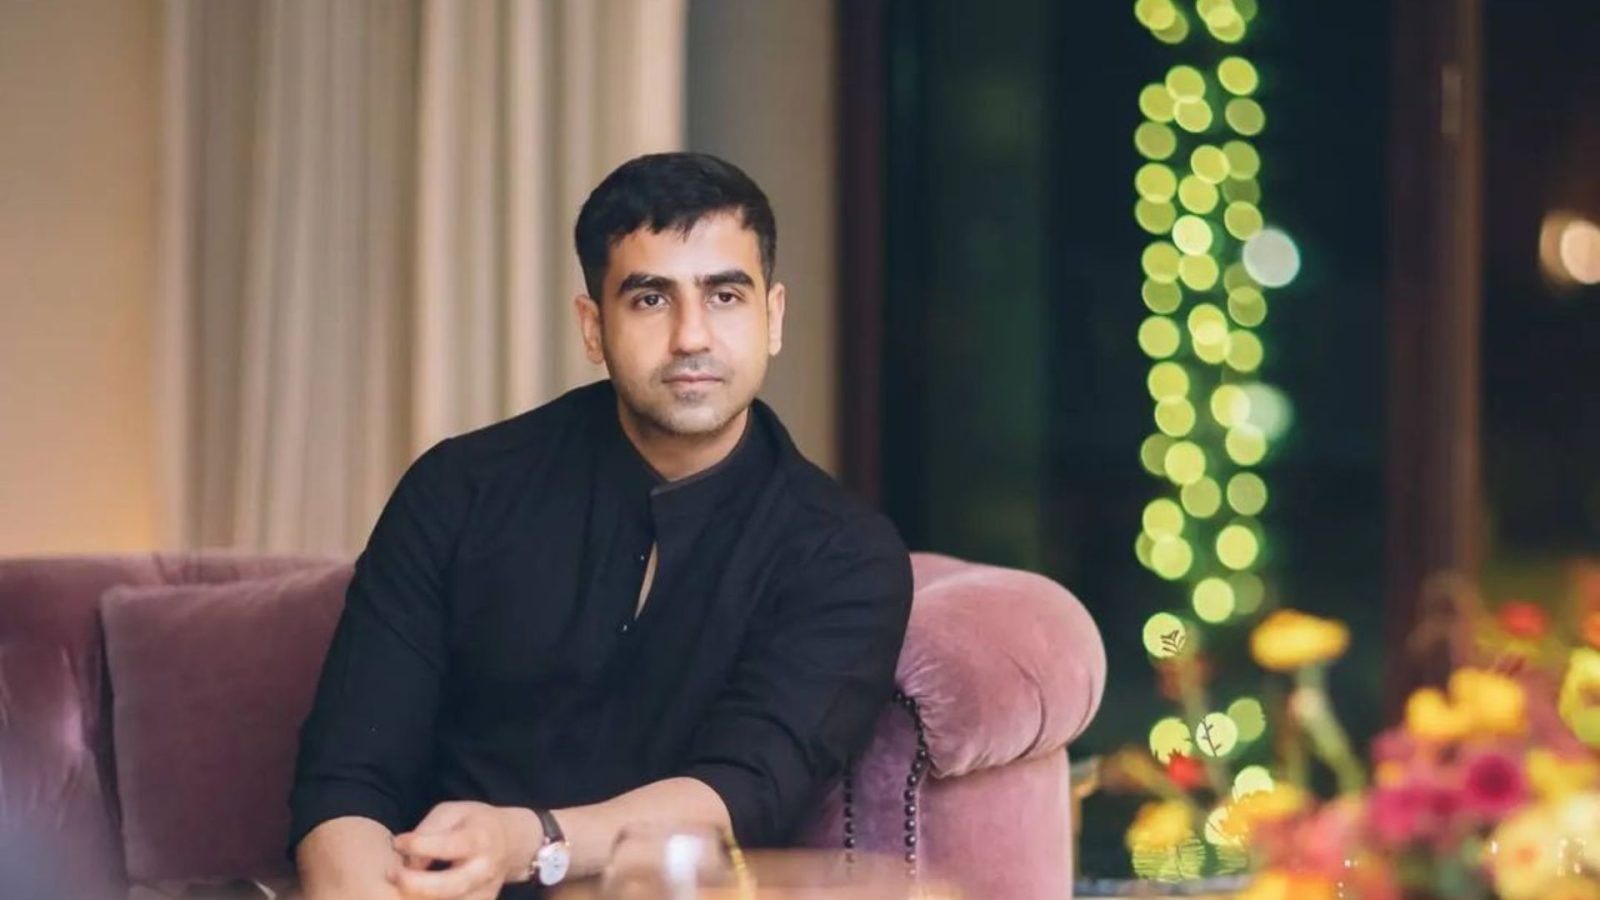 A look at the net worth of Zerodha co-founder Nikhil Kamath